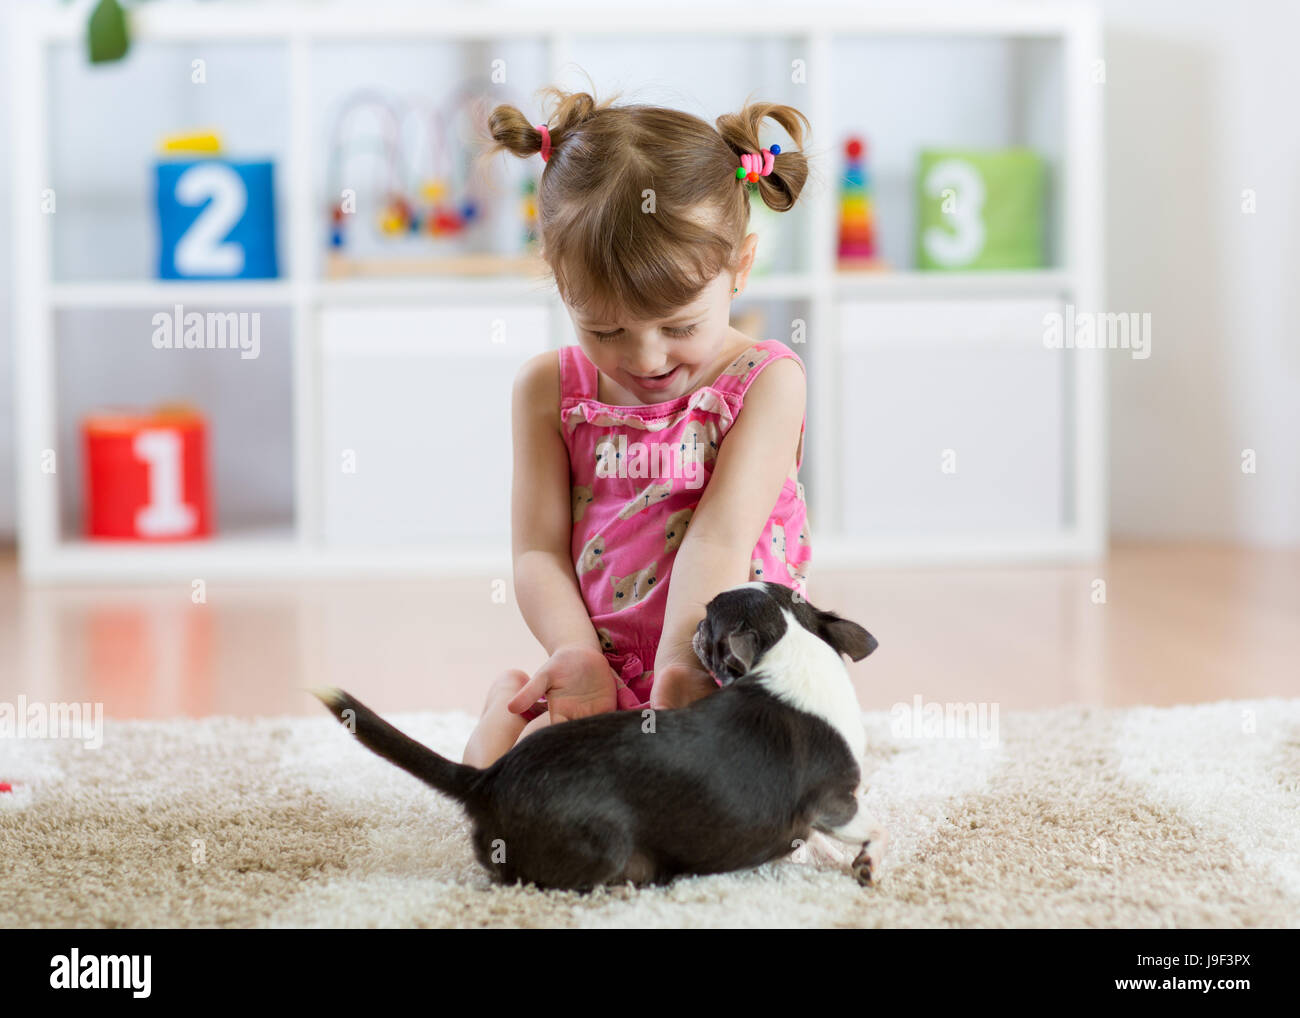 Girl playing with chihuahua pet dog indoor Stock Photo